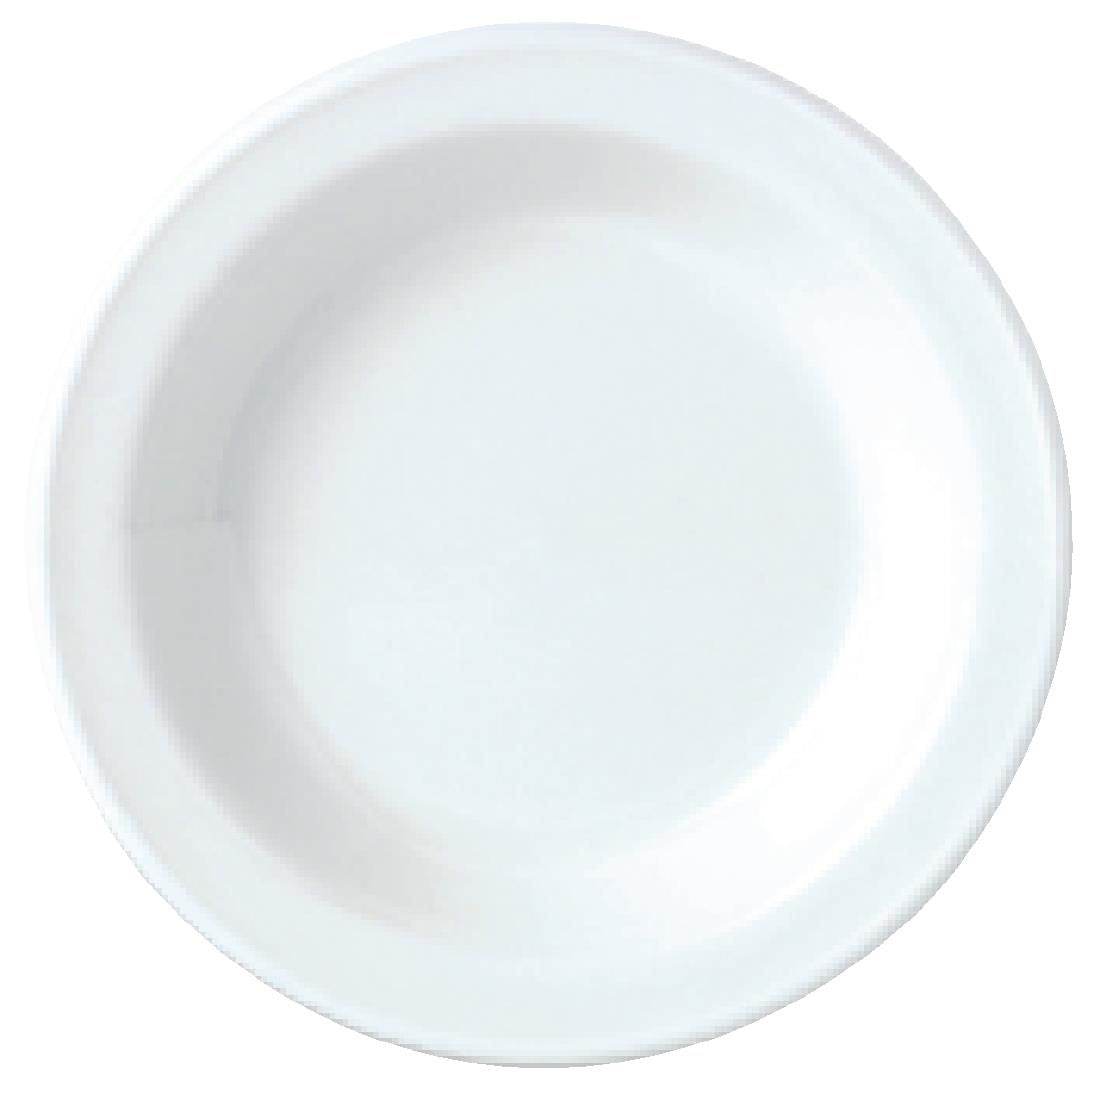 Steelite Simplicity White Butter Pad Dishes 102mm (Pack of 24)